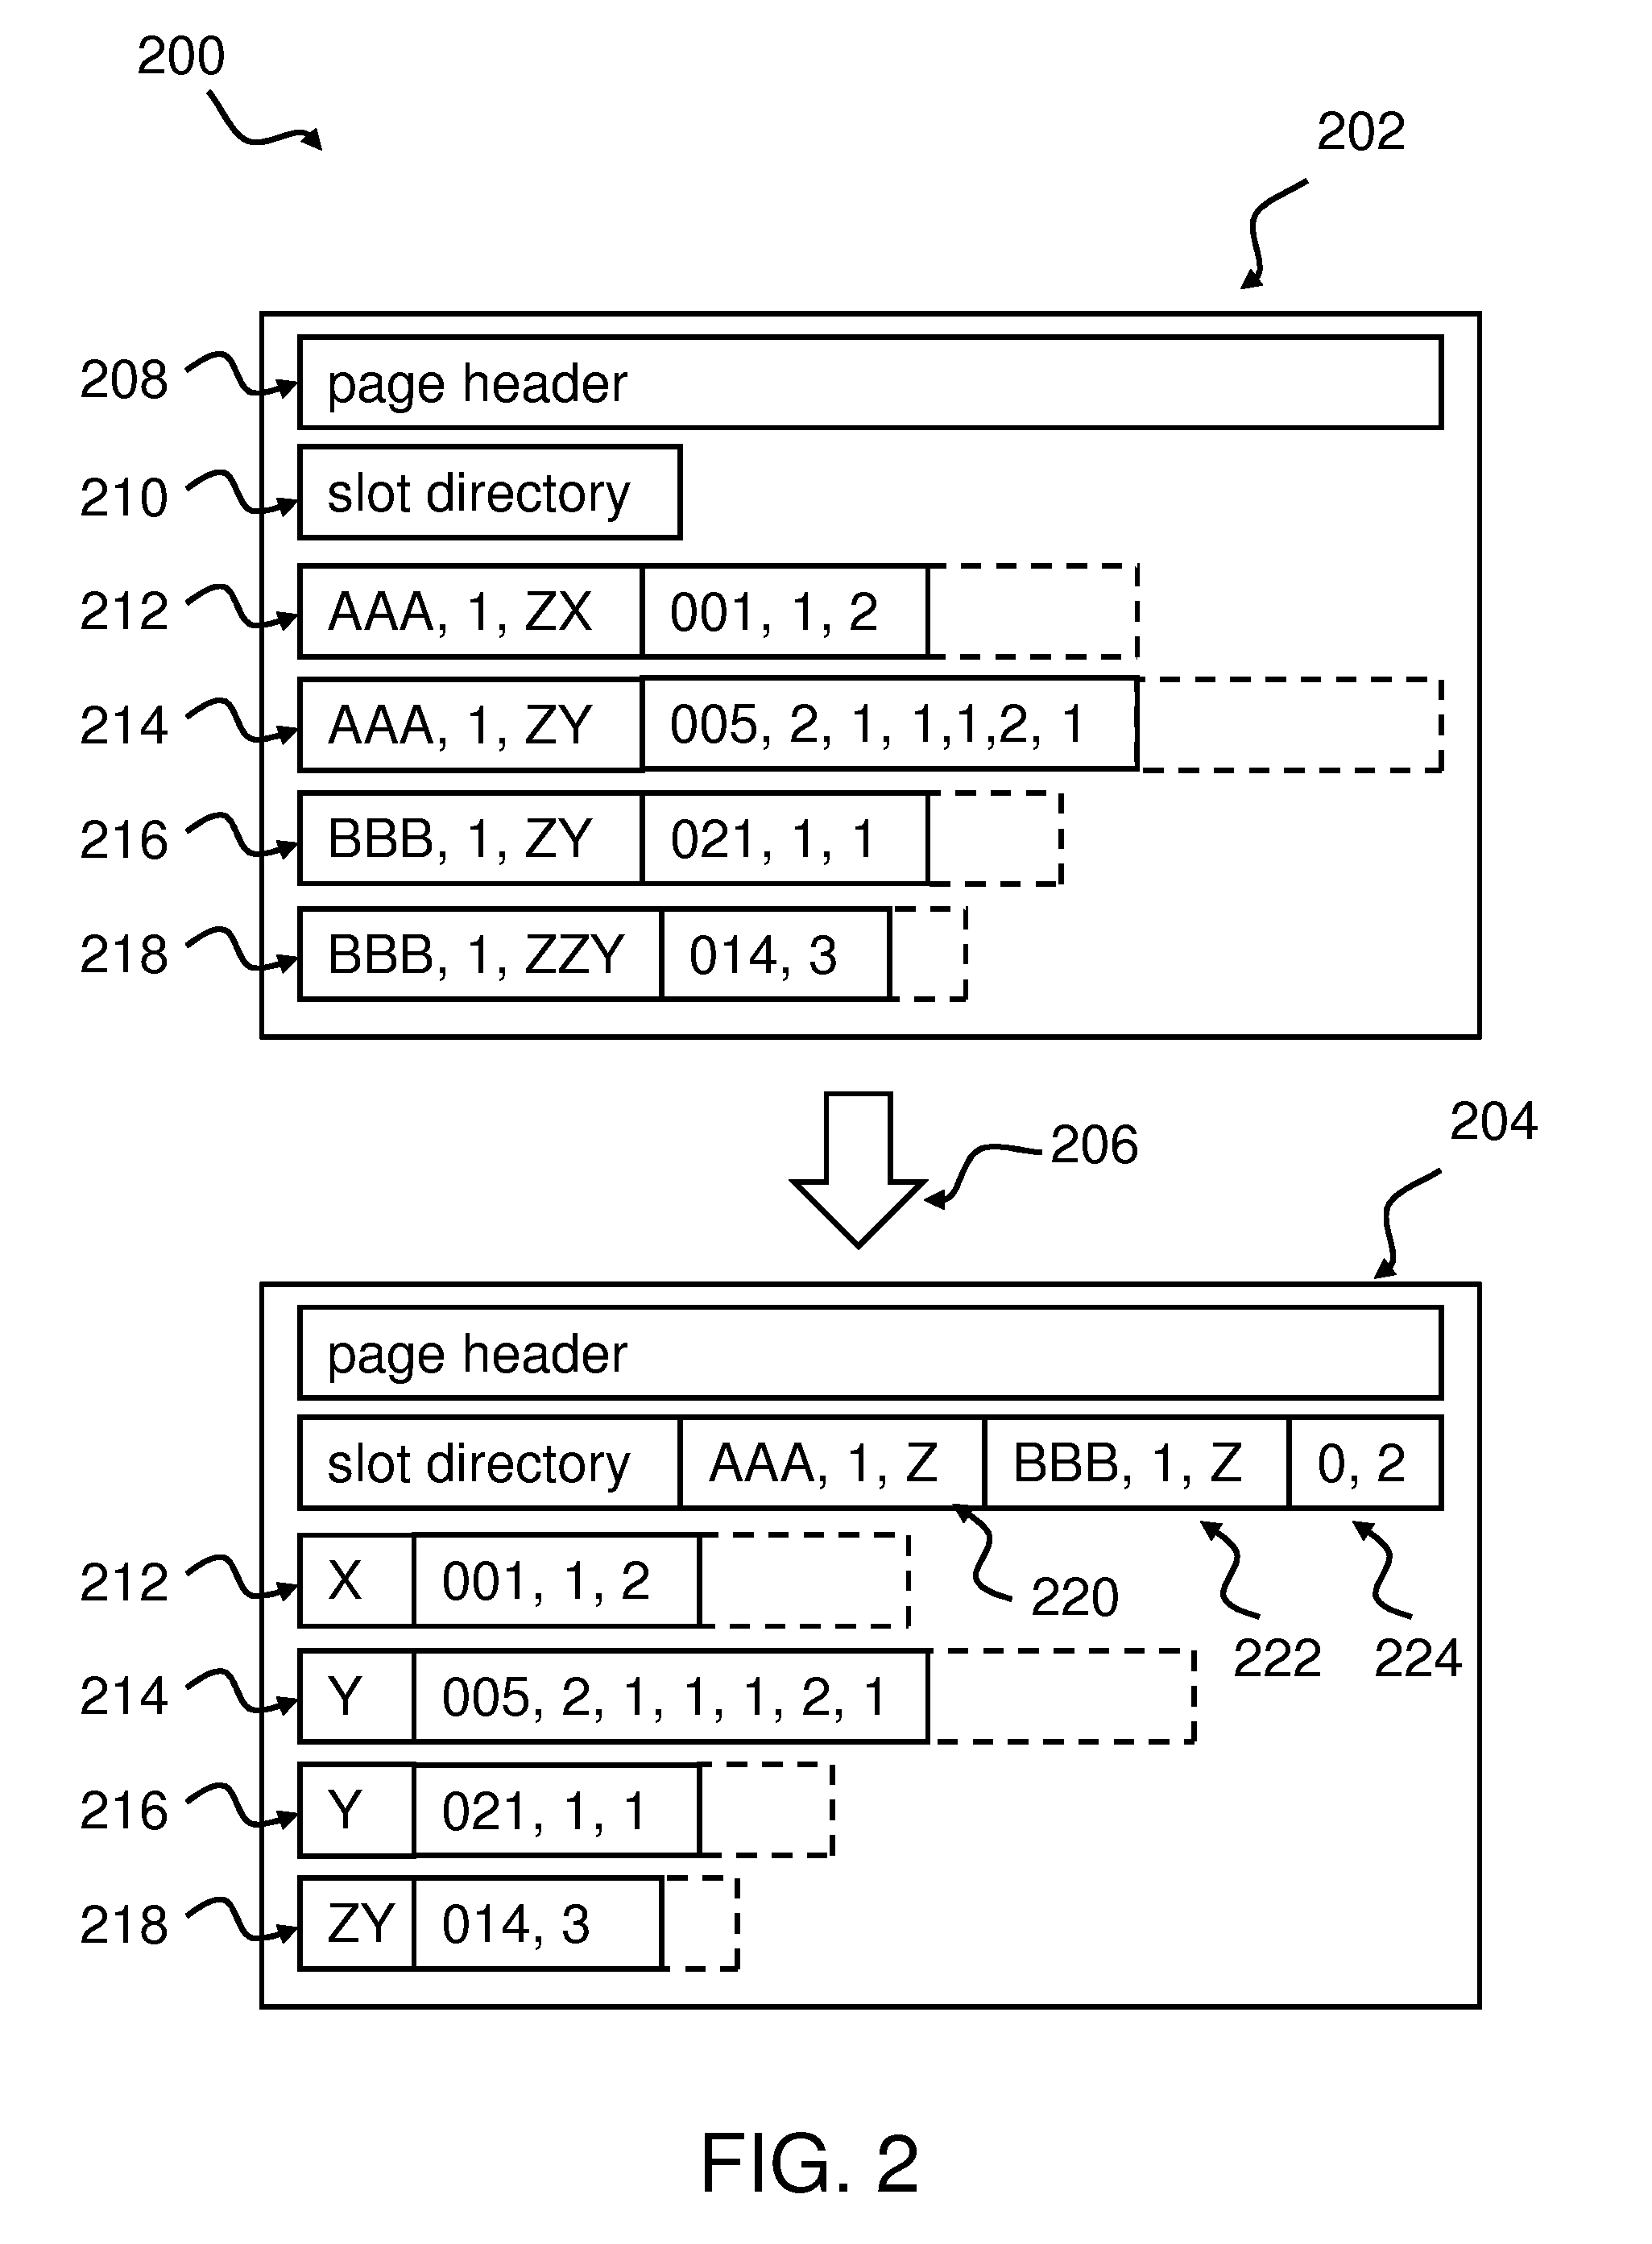 Index compression in a database system